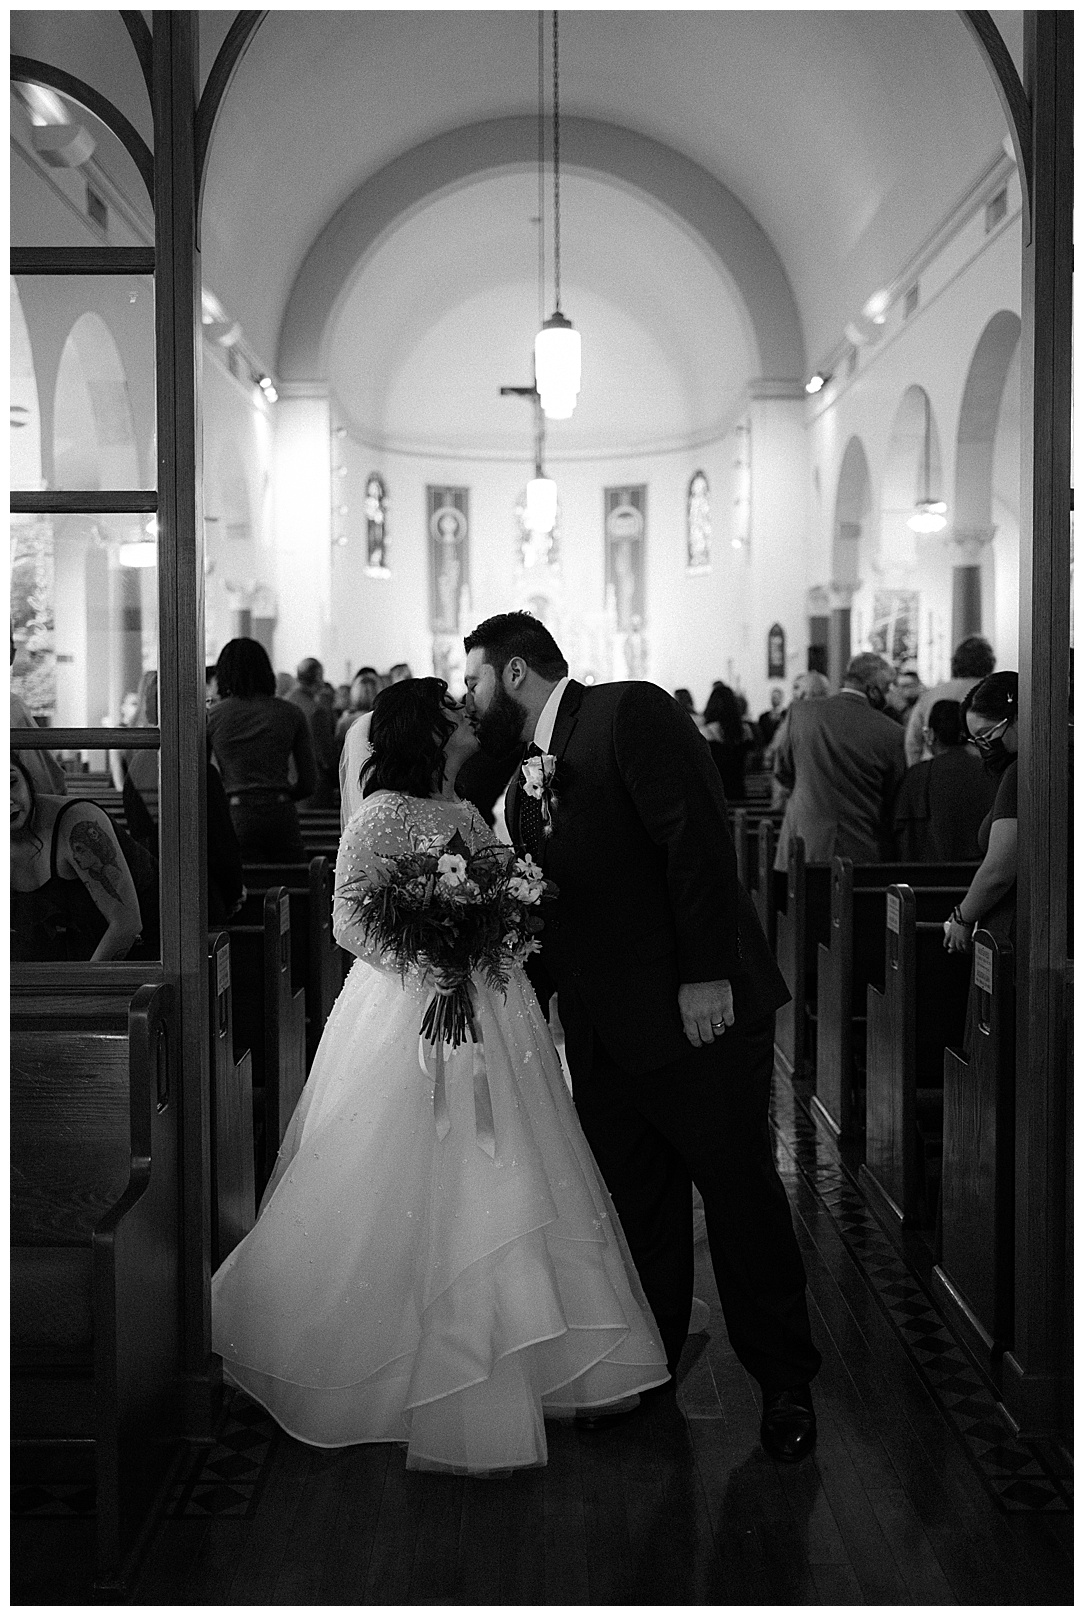 black and white picture of bride and groom kissing at the end of the aisle in church wedding